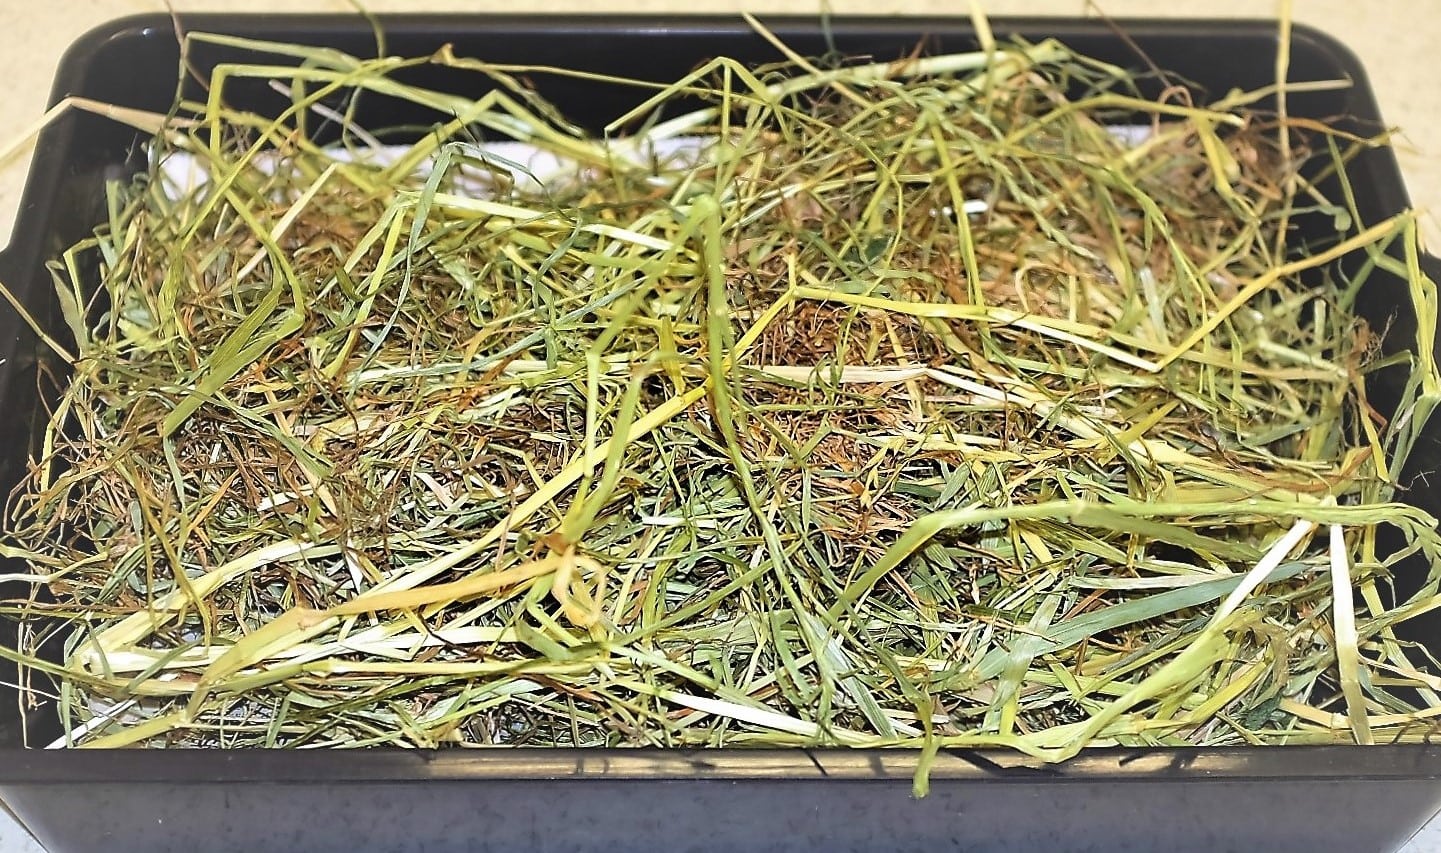 Tasty hay in a container for our little guests